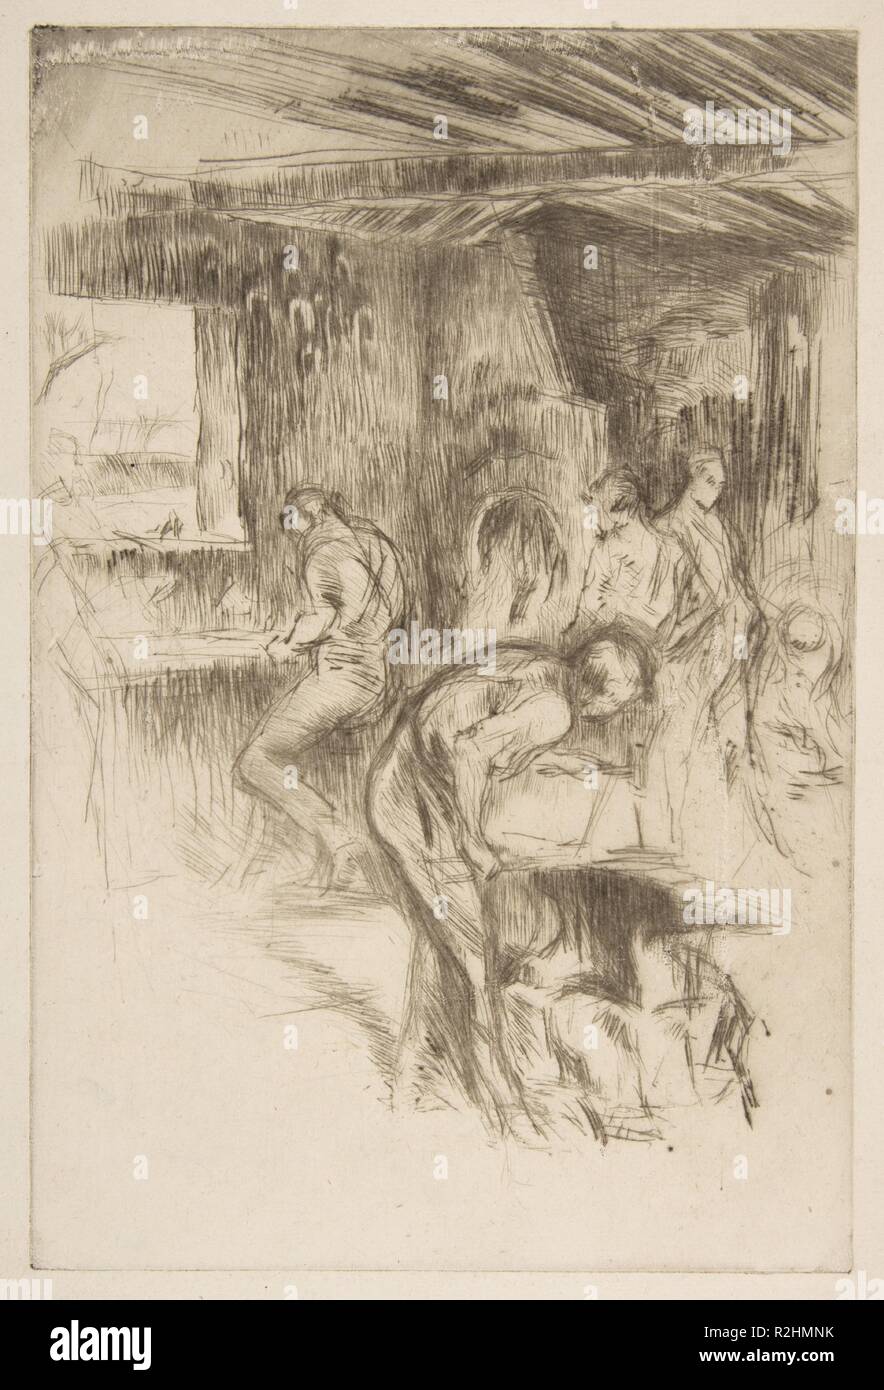 The Little Forge (The Little Forge, Liverpool). Artist: James McNeill Whistler (American, Lowell, Massachusetts 1834-1903 London). Dimensions: Plate: 8 7/8 × 5 7/8 in. (22.6 × 14.9 cm)  Sheet: 13 1/8 × 8 3/16 in. (33.3 × 20.8 cm). Date: 1875. Museum: Metropolitan Museum of Art, New York, USA. Stock Photo